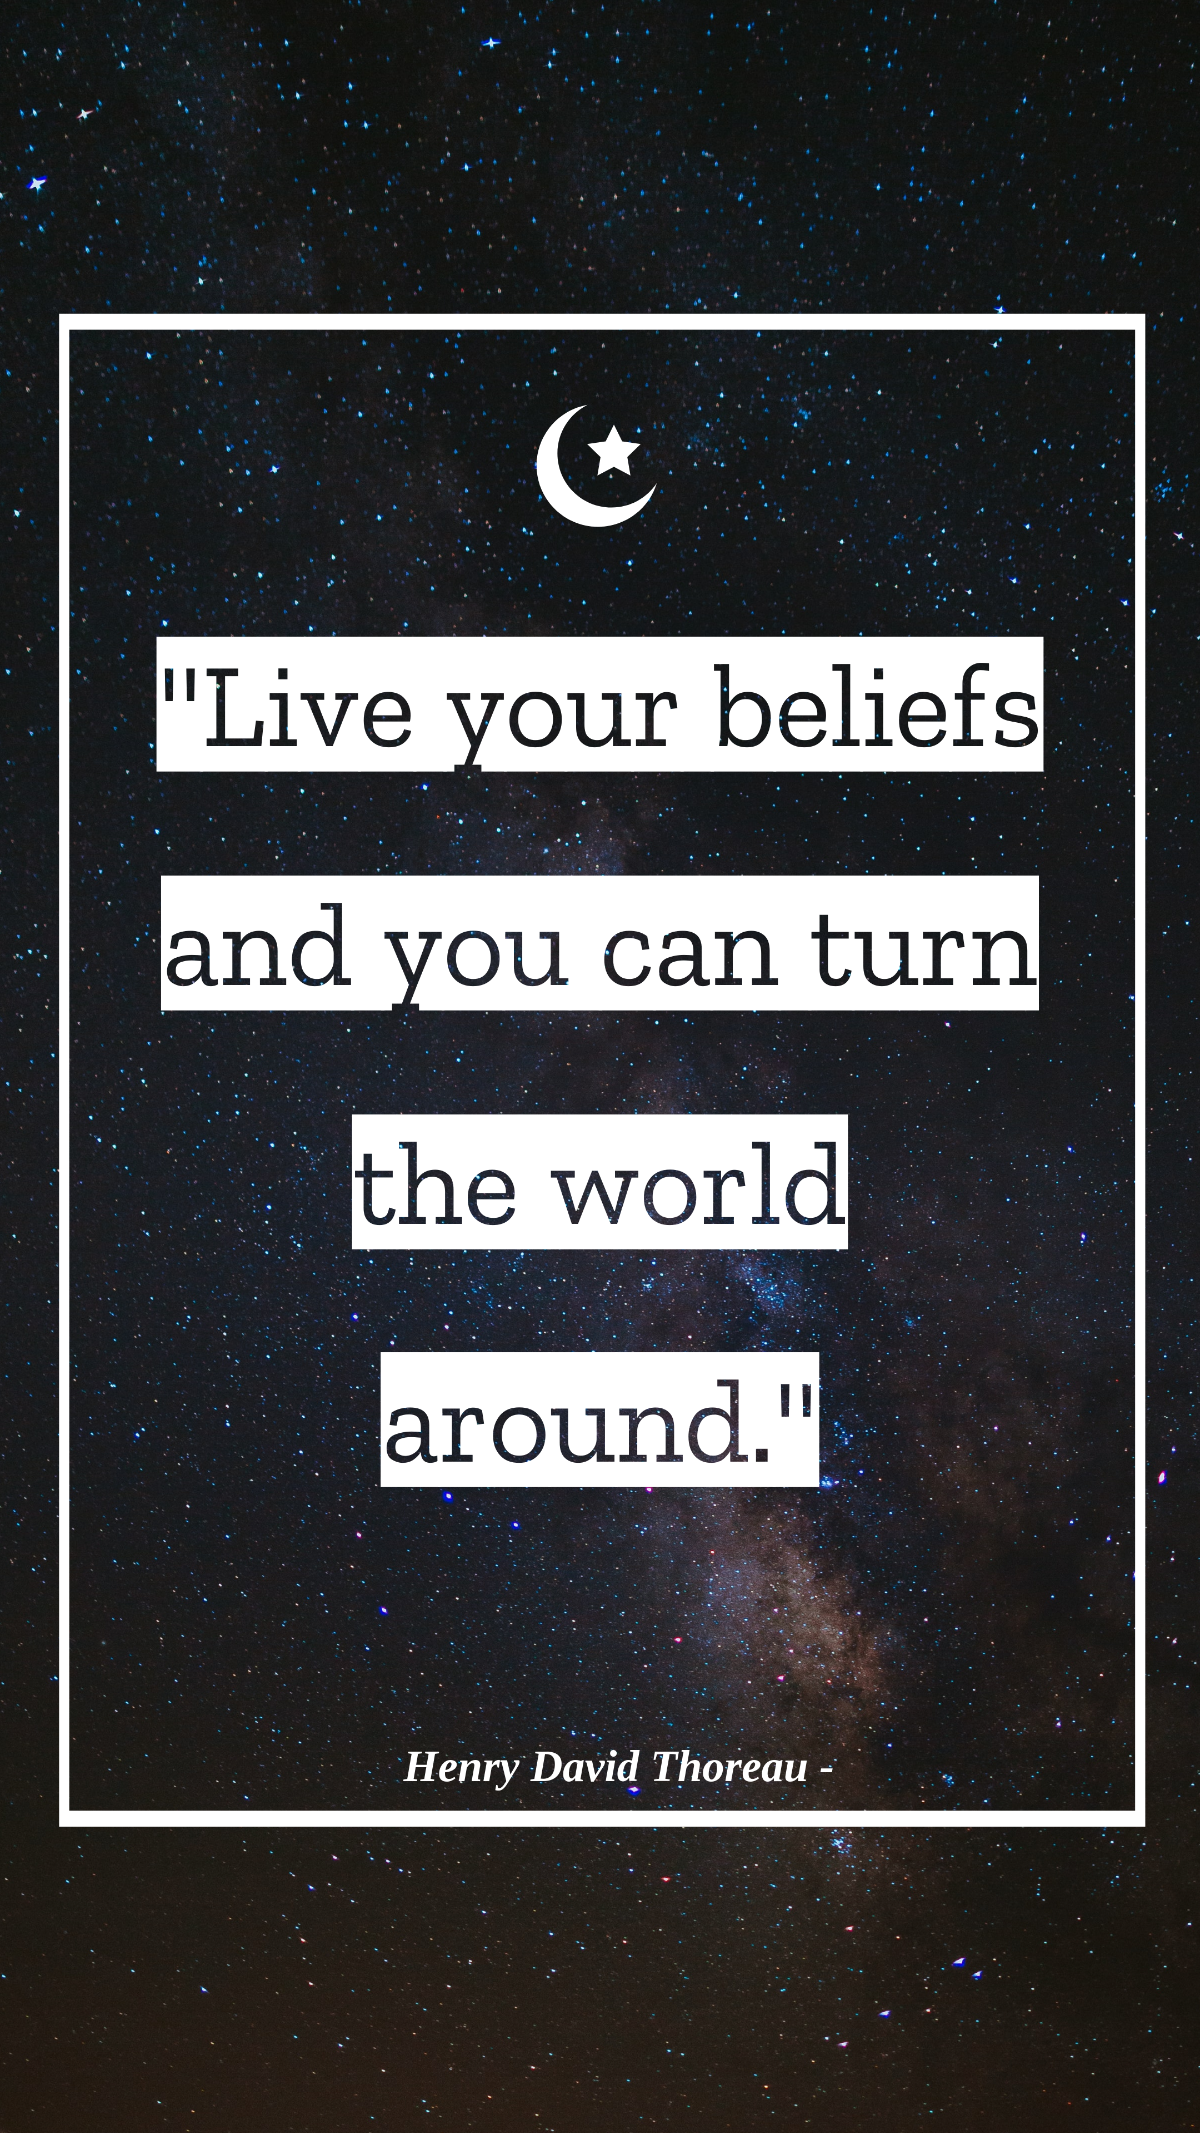 Henry David Thoreau - Live your beliefs and you can turn the world around. Template